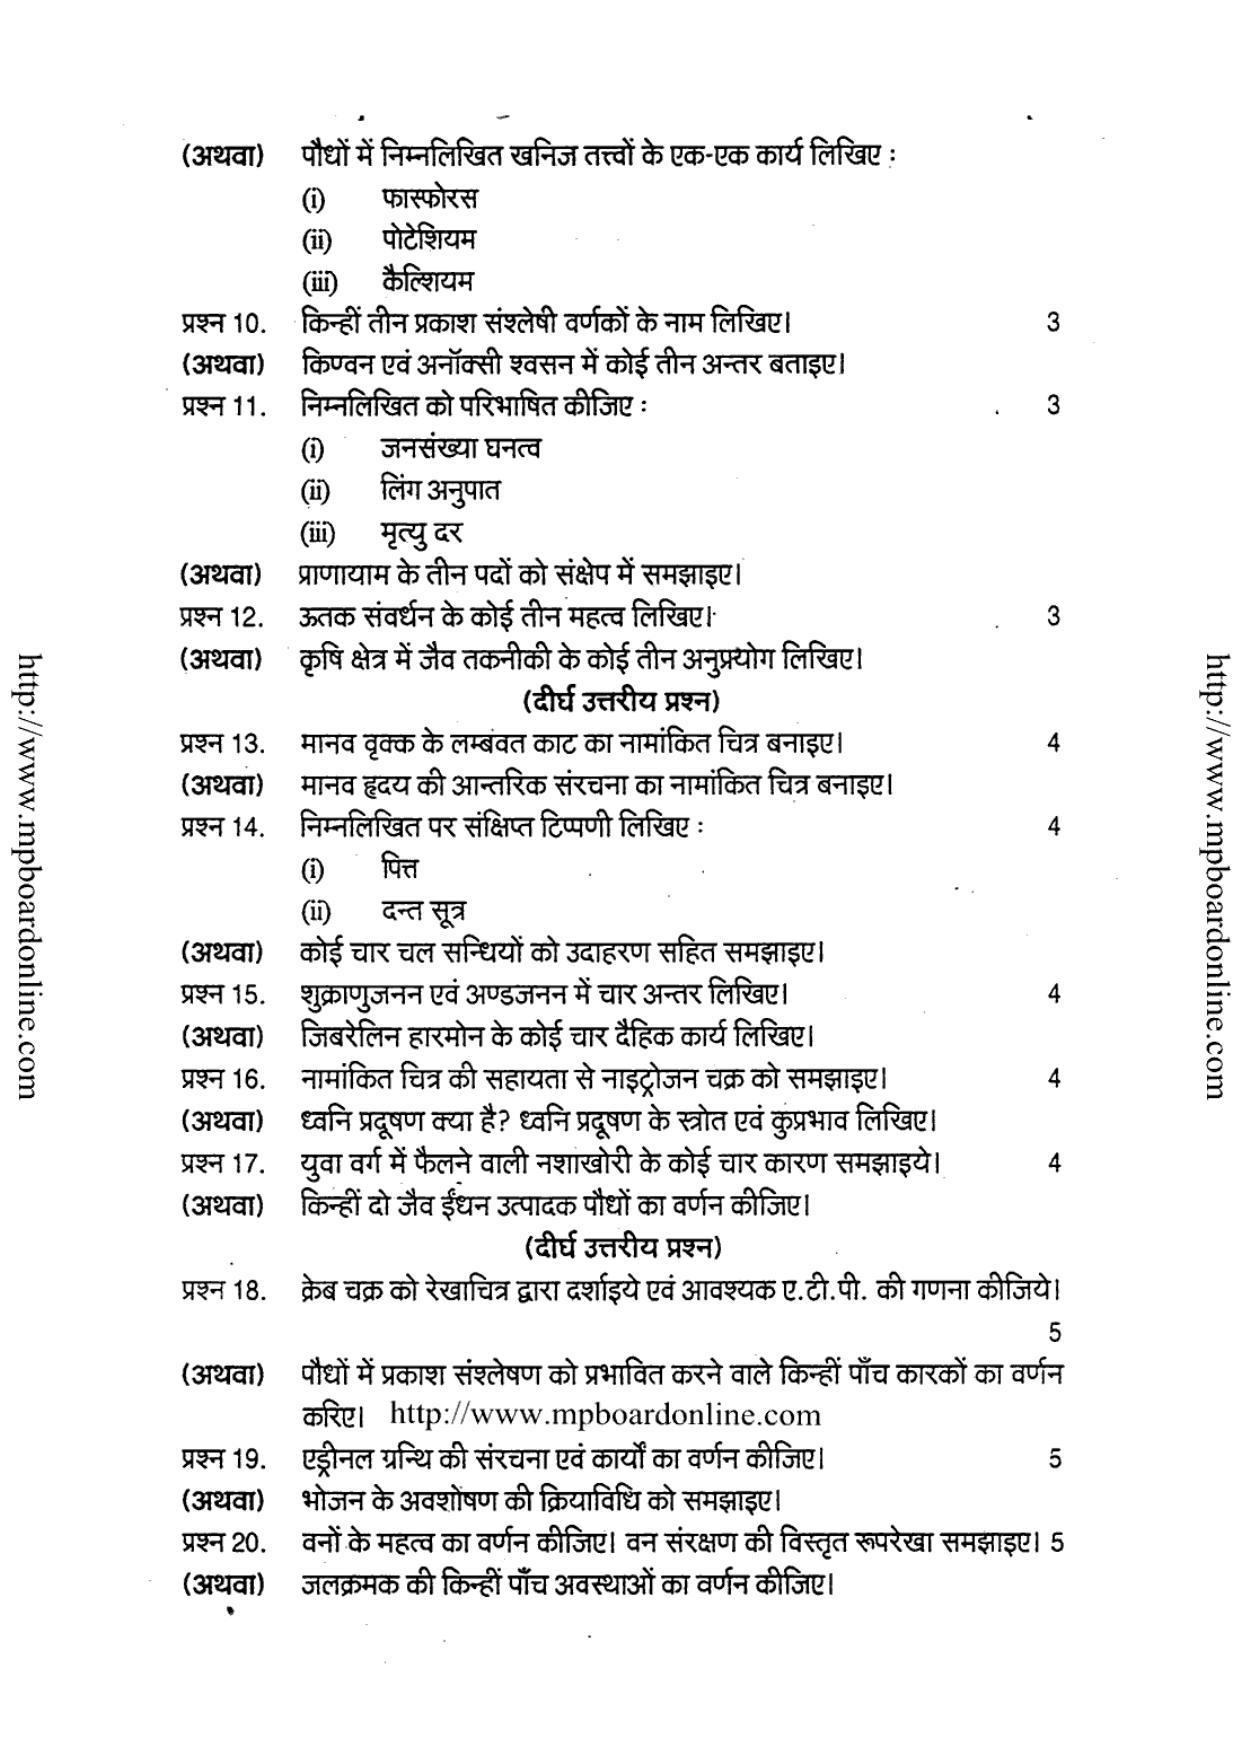 MP Board Class 12 Biology 2018 Question Paper - Page 3